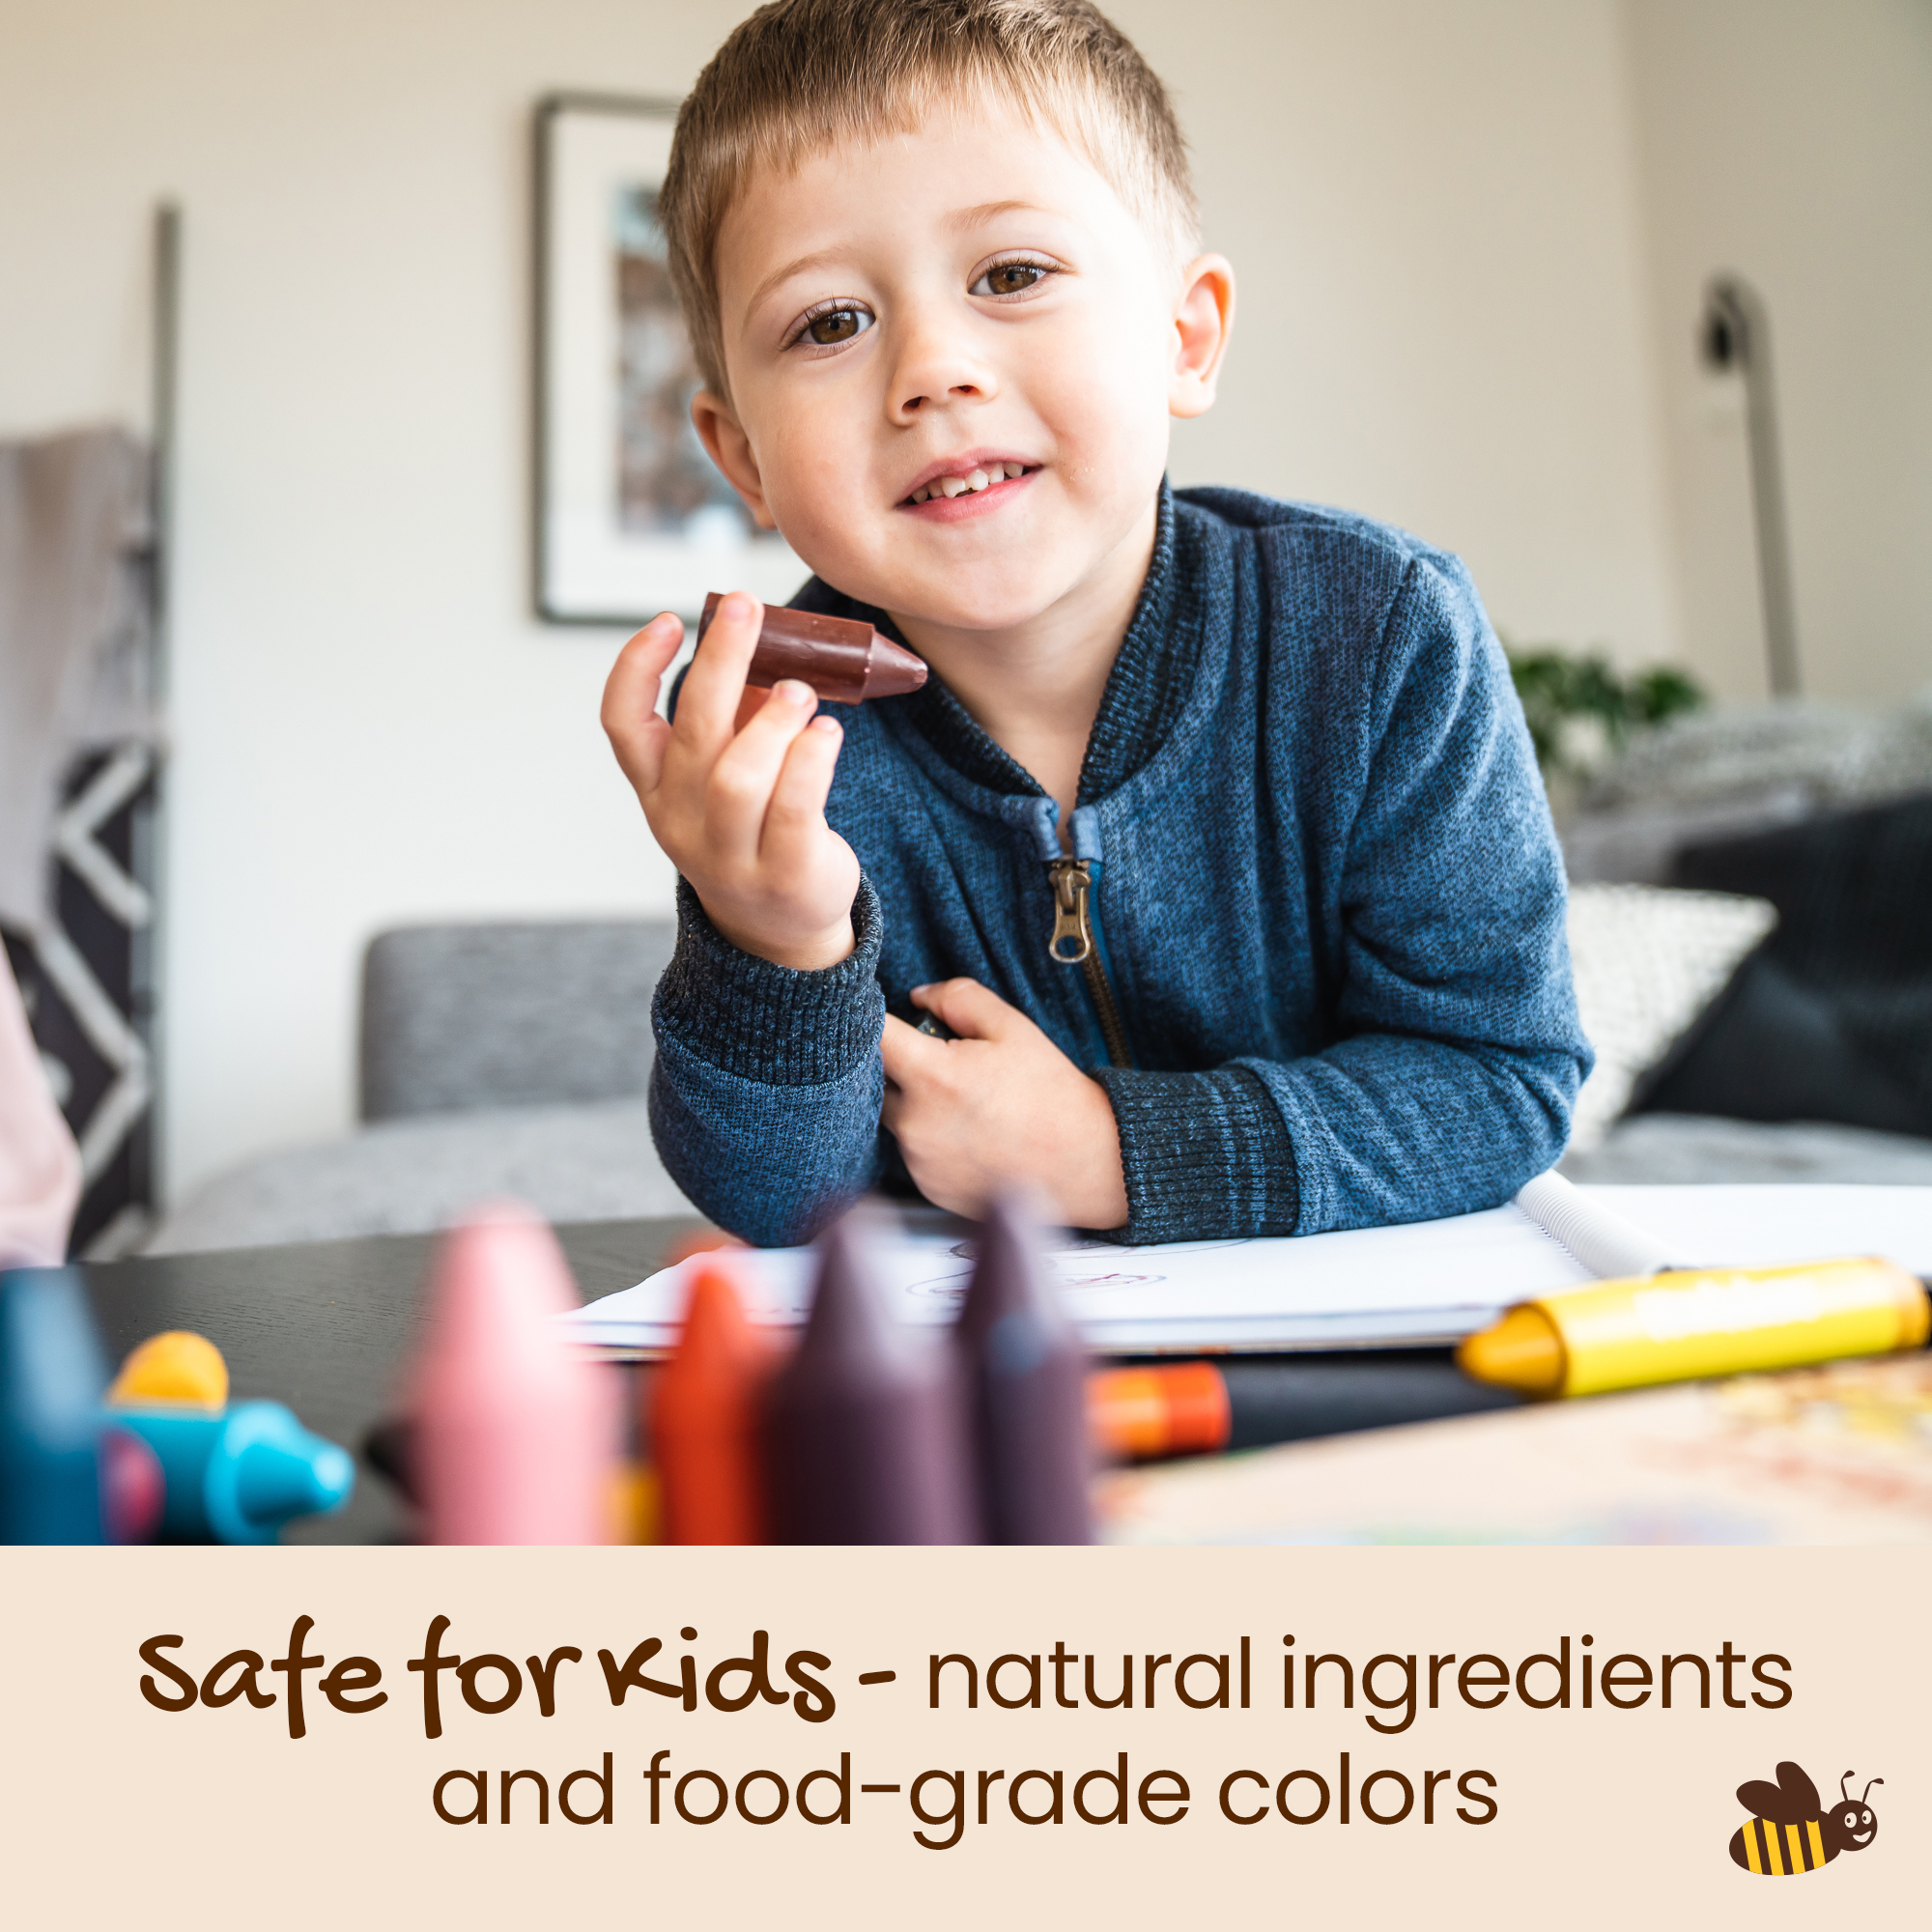 Honeysticks 100% Pure Beeswax Crayons (12 Pack) - Non Toxic Crayons Handmade with Natural Beeswax and Food Grade Colours - Child / Toddler Safe, Easy to Hold and Use - Sustainably Made in New Zealand - image 5 of 6